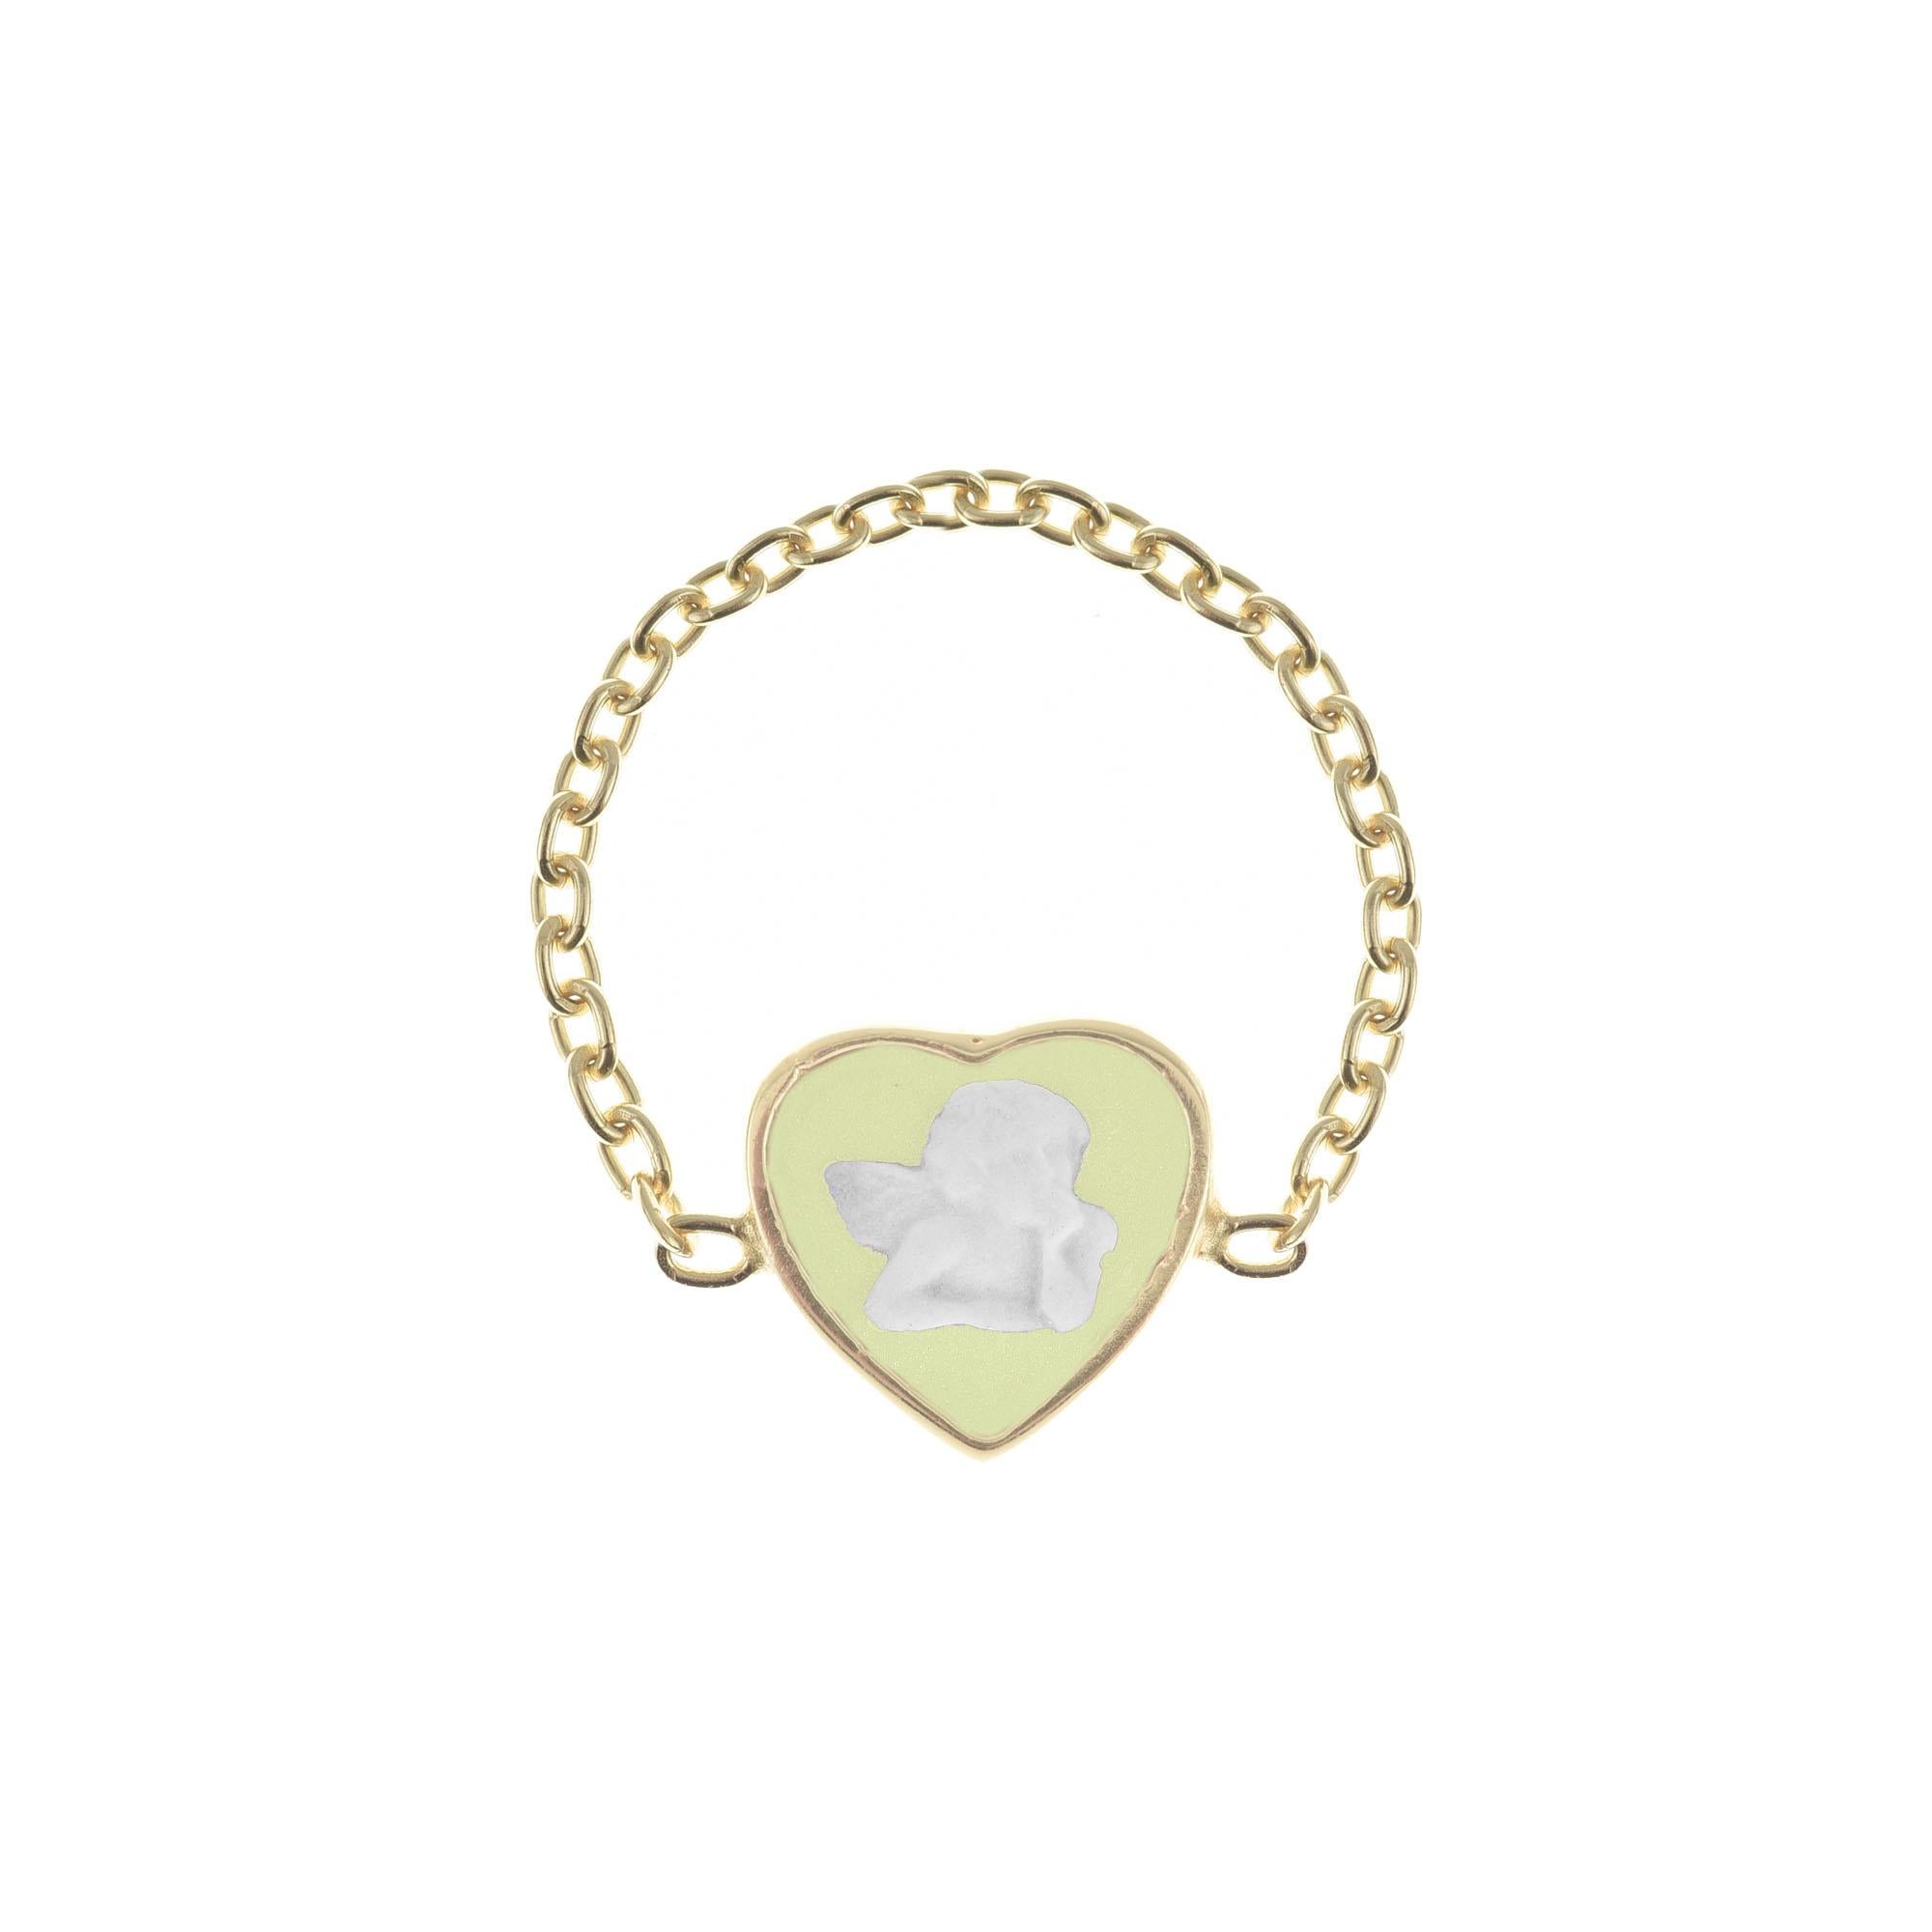 Neoclassical 18 Karat Gold-Plated Sterling Silver Cameo Cherubs Chain Ring